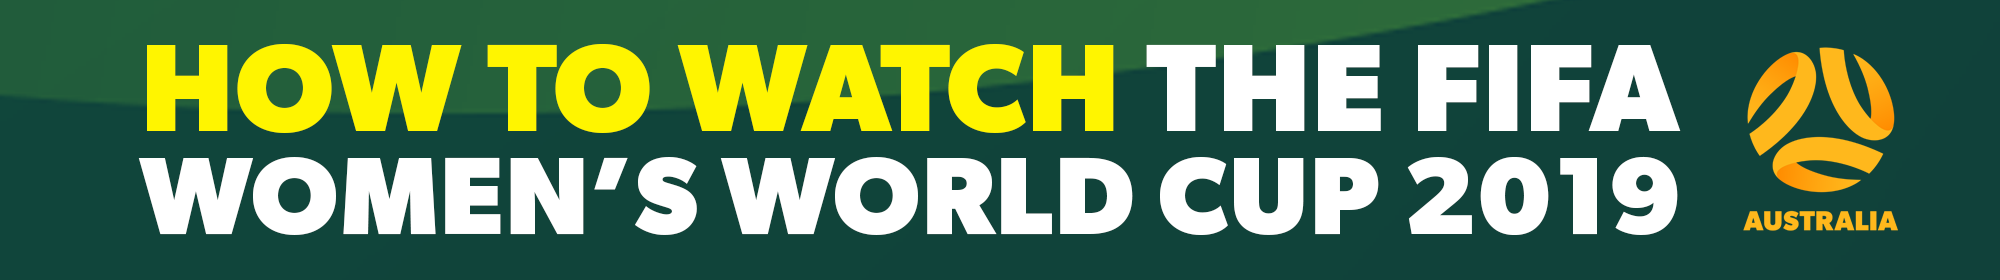 How to watch the FIFA Women's World Cup